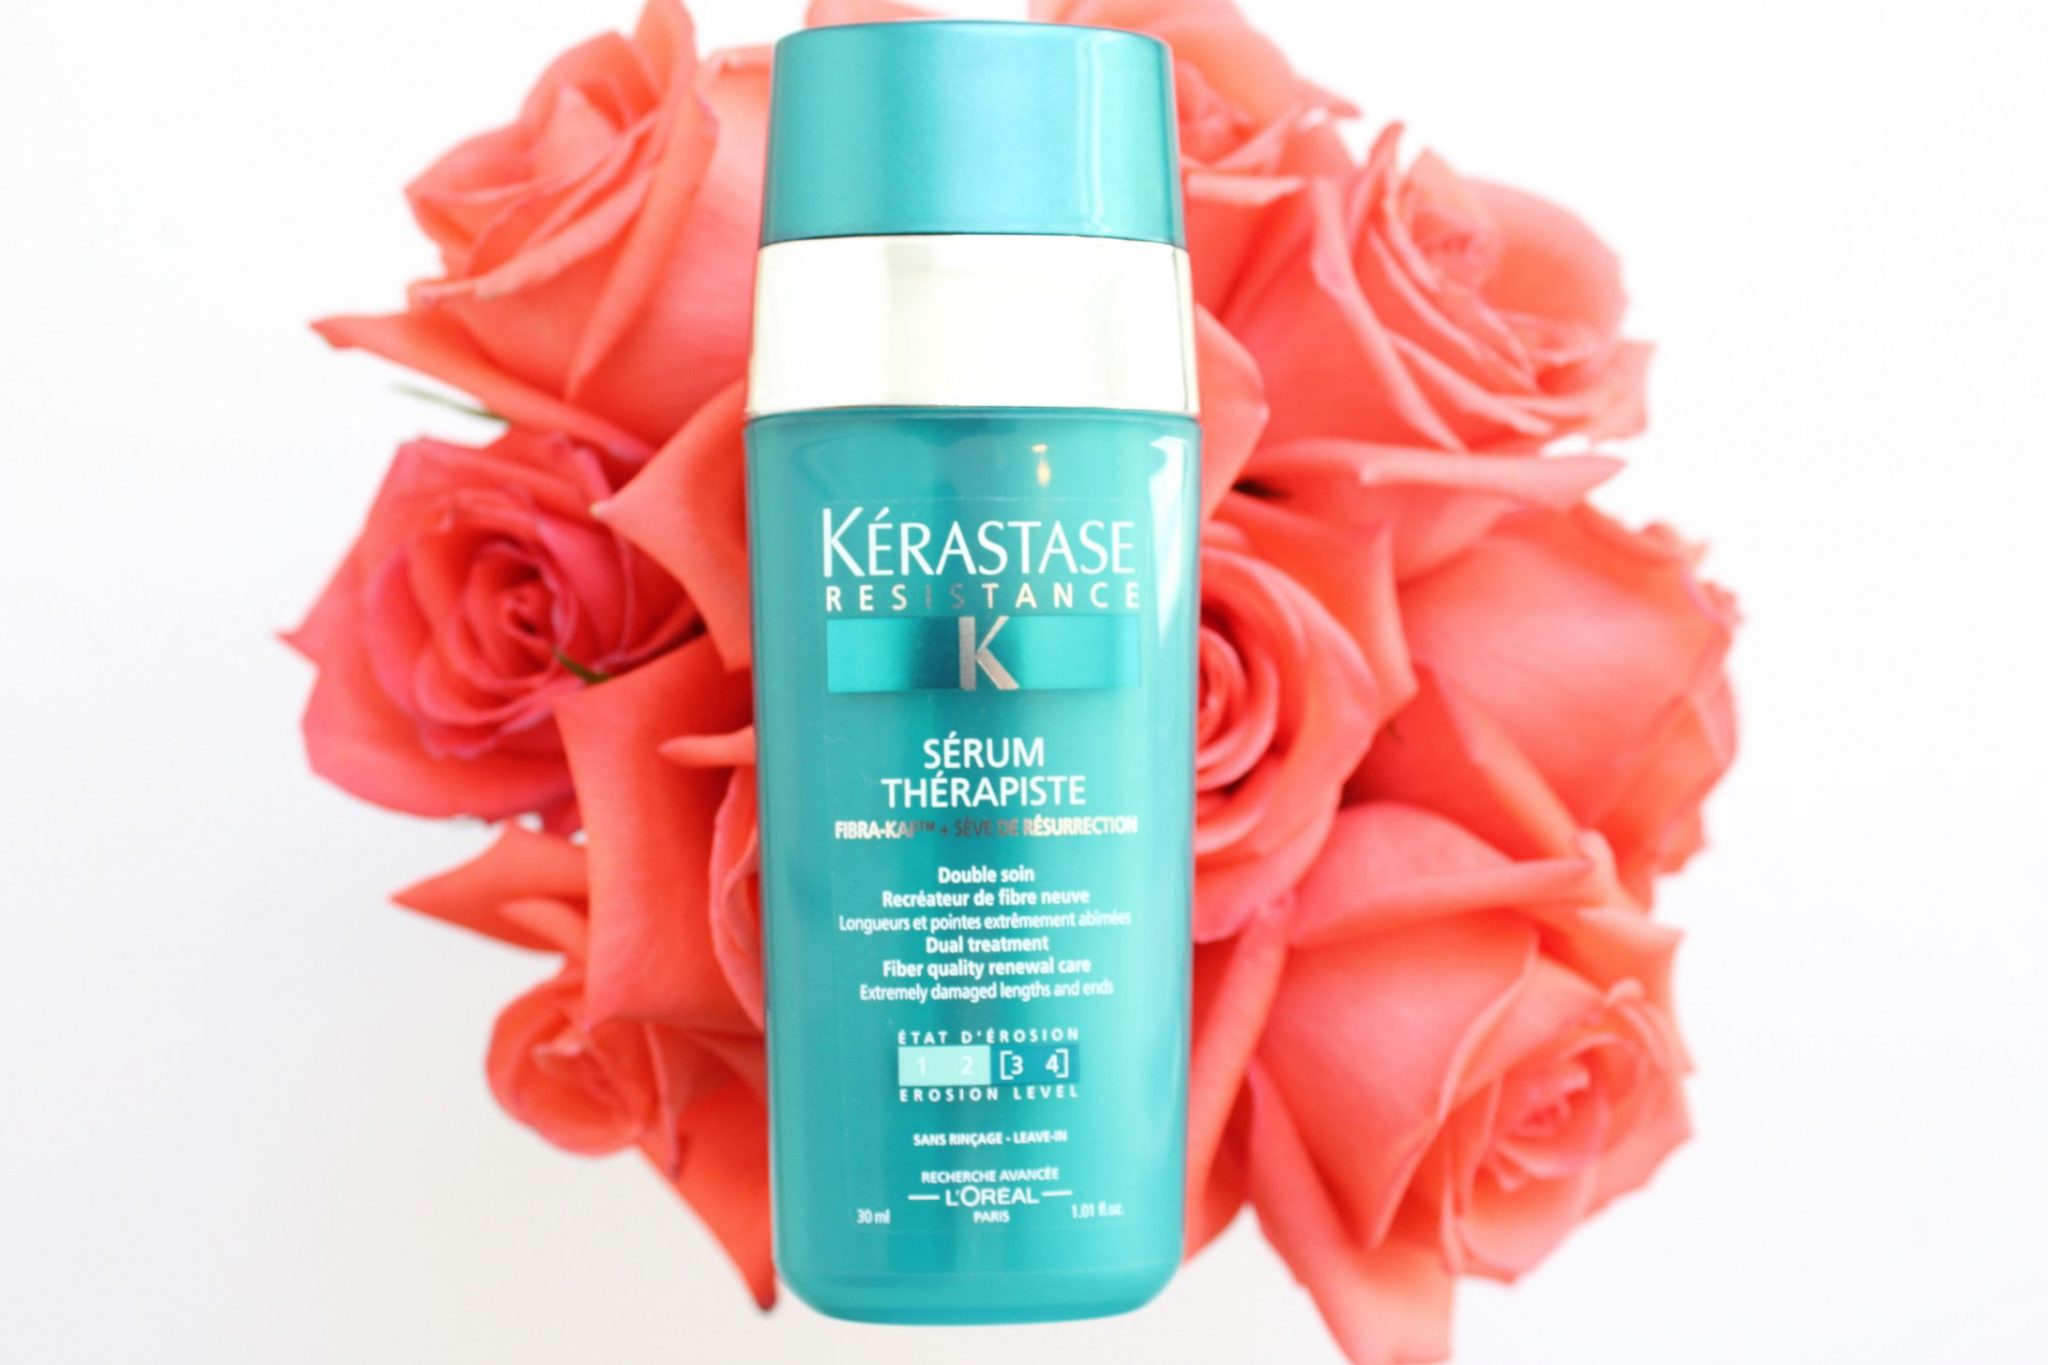 Personalized Haircare from Kérastase + Win Your Own Kérastase Collection